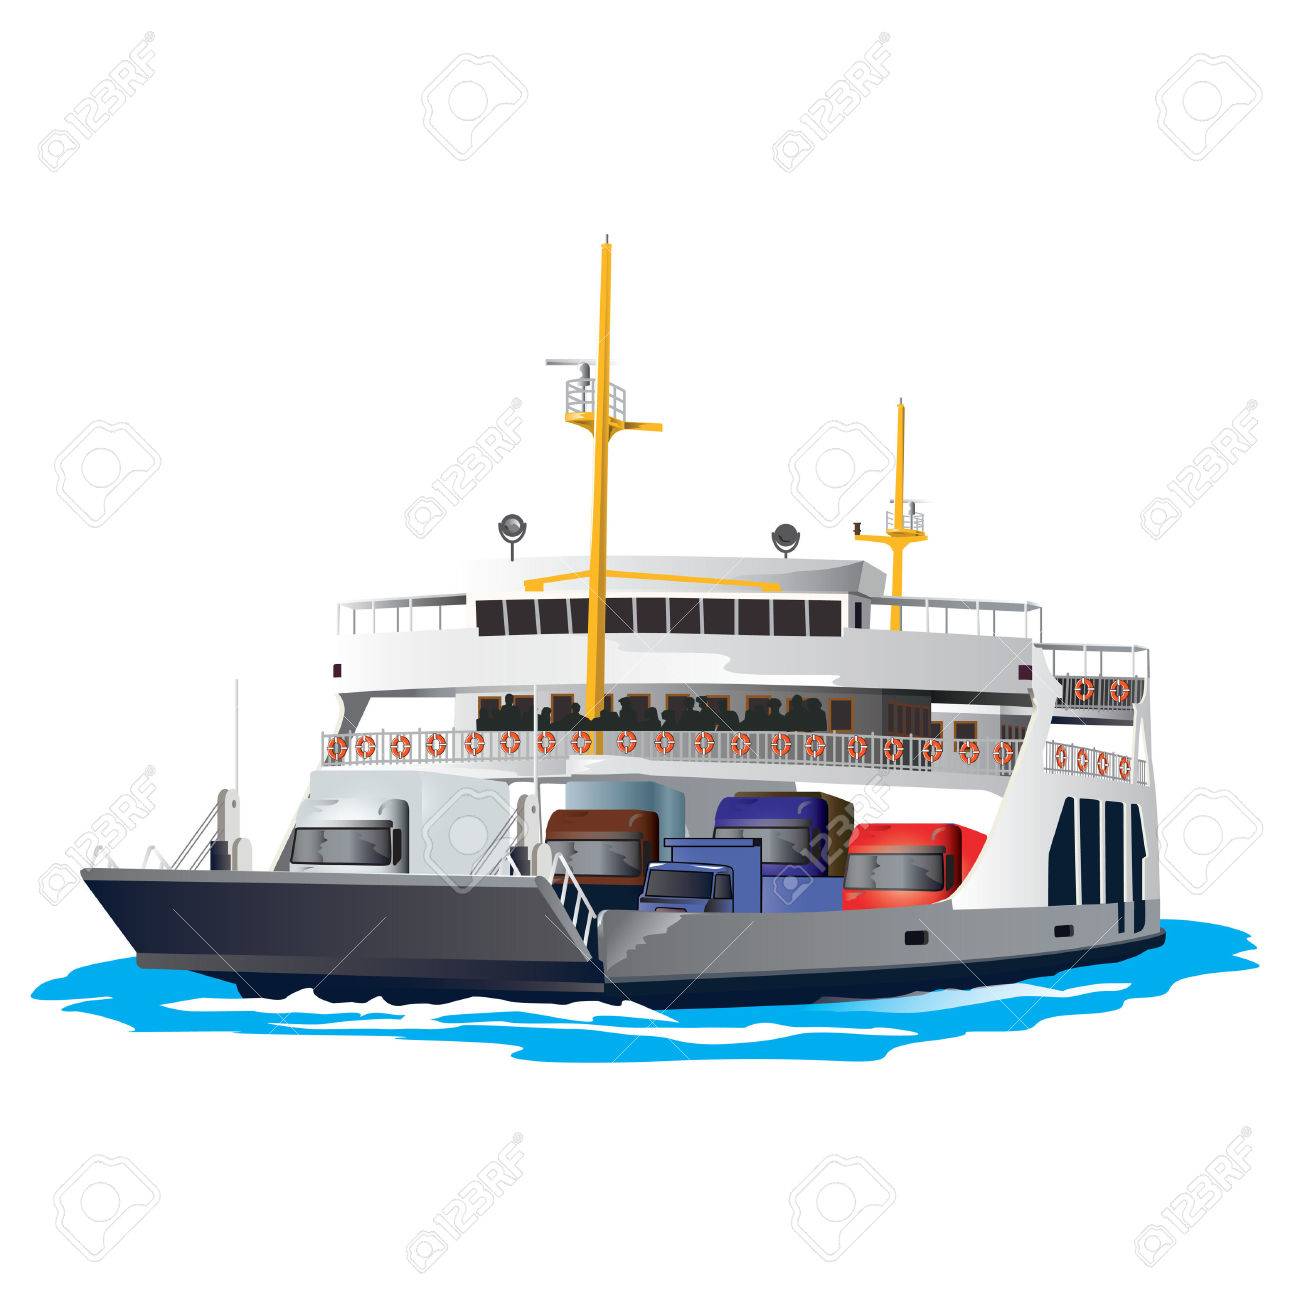 Ferry boat clipart.